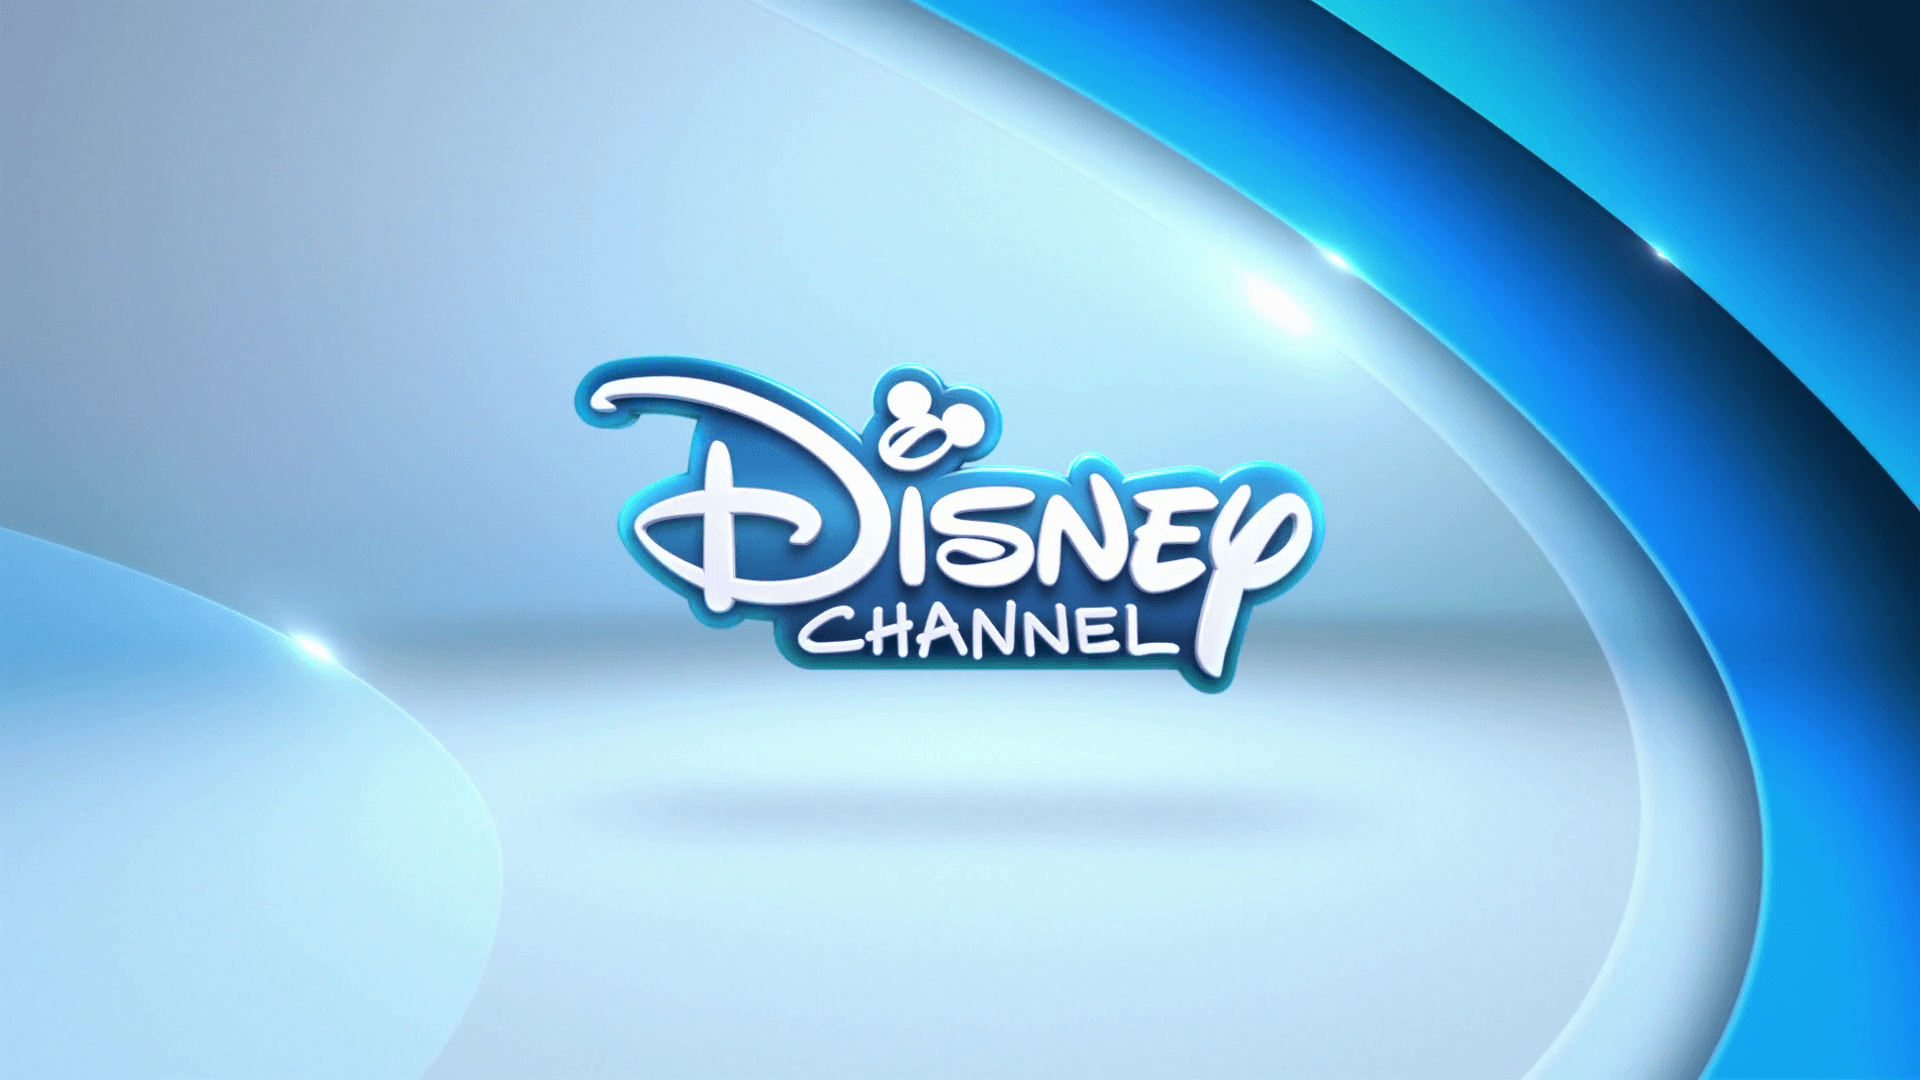 Disney Channel Movie Logo - Disney Channel is Ready for Summer! - LaughingPlace.com